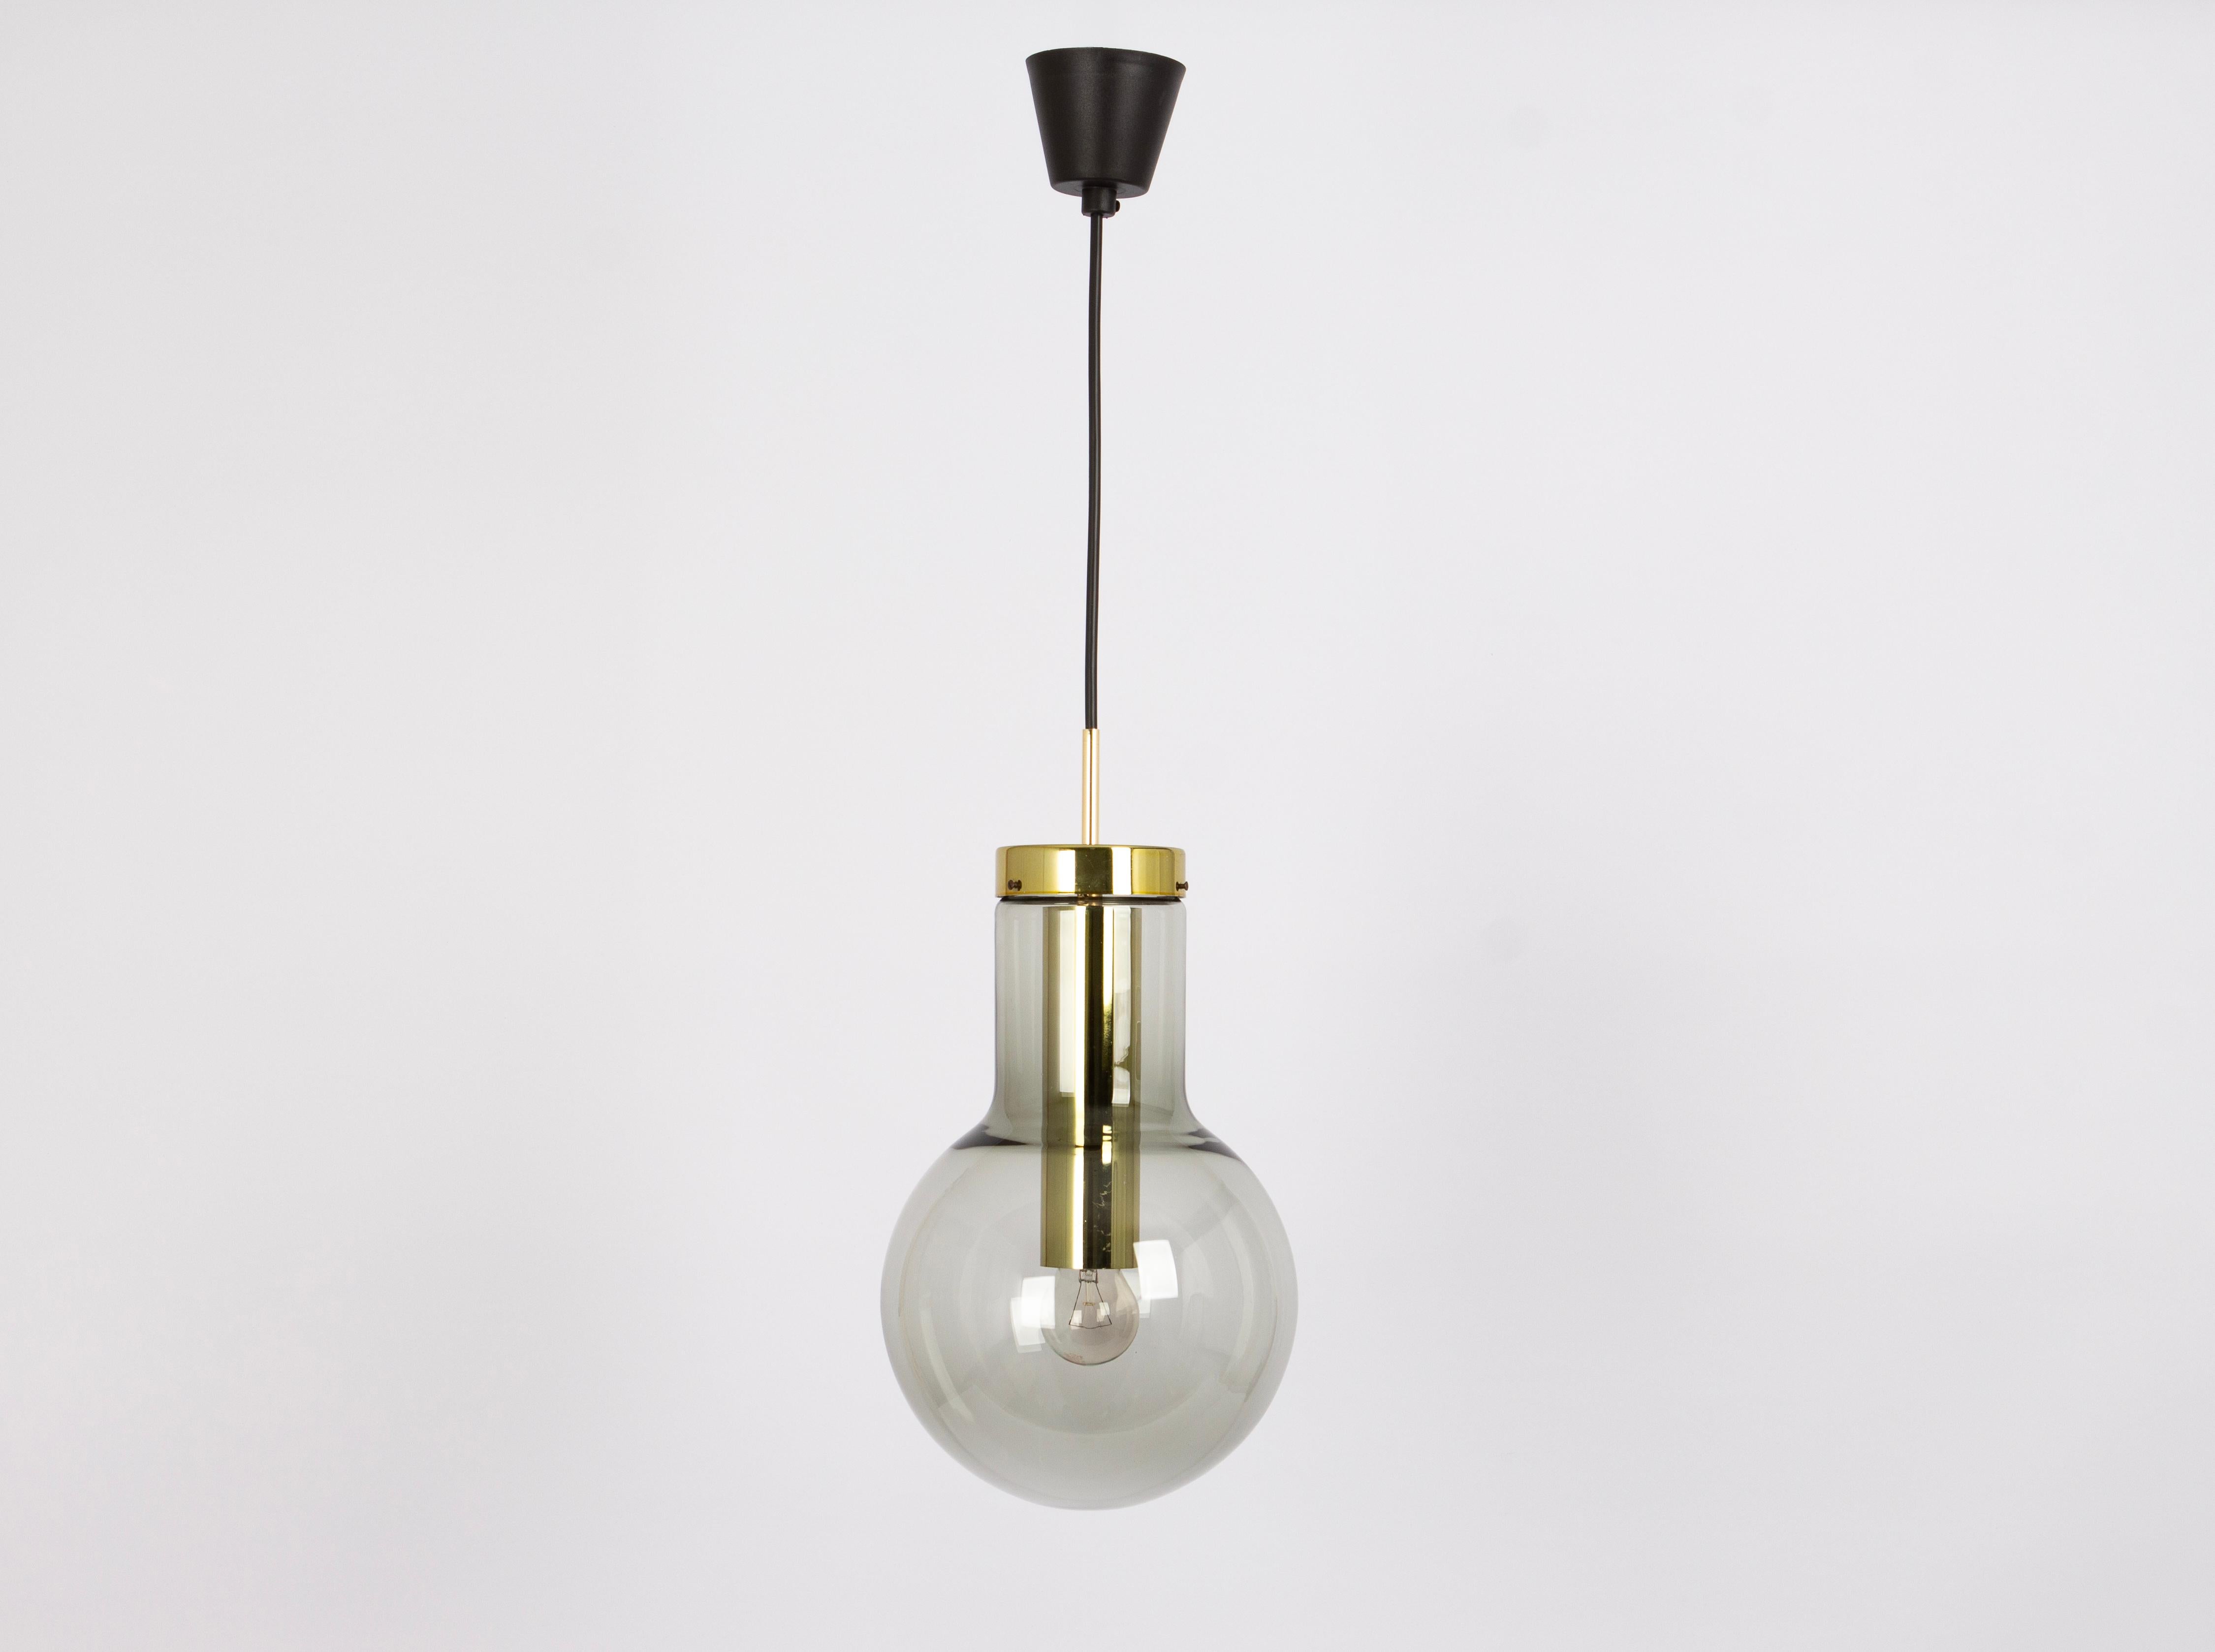 1 of 20 Maxi Bulb Pendant light designed by Raak, Netherlands, 1970s.
Smoked glass in a very beautiful smokey brown color.

High quality and in very good condition. Cleaned, well-wired and ready to use. 

Each fixture requires 1 x E27 Standard bulbs